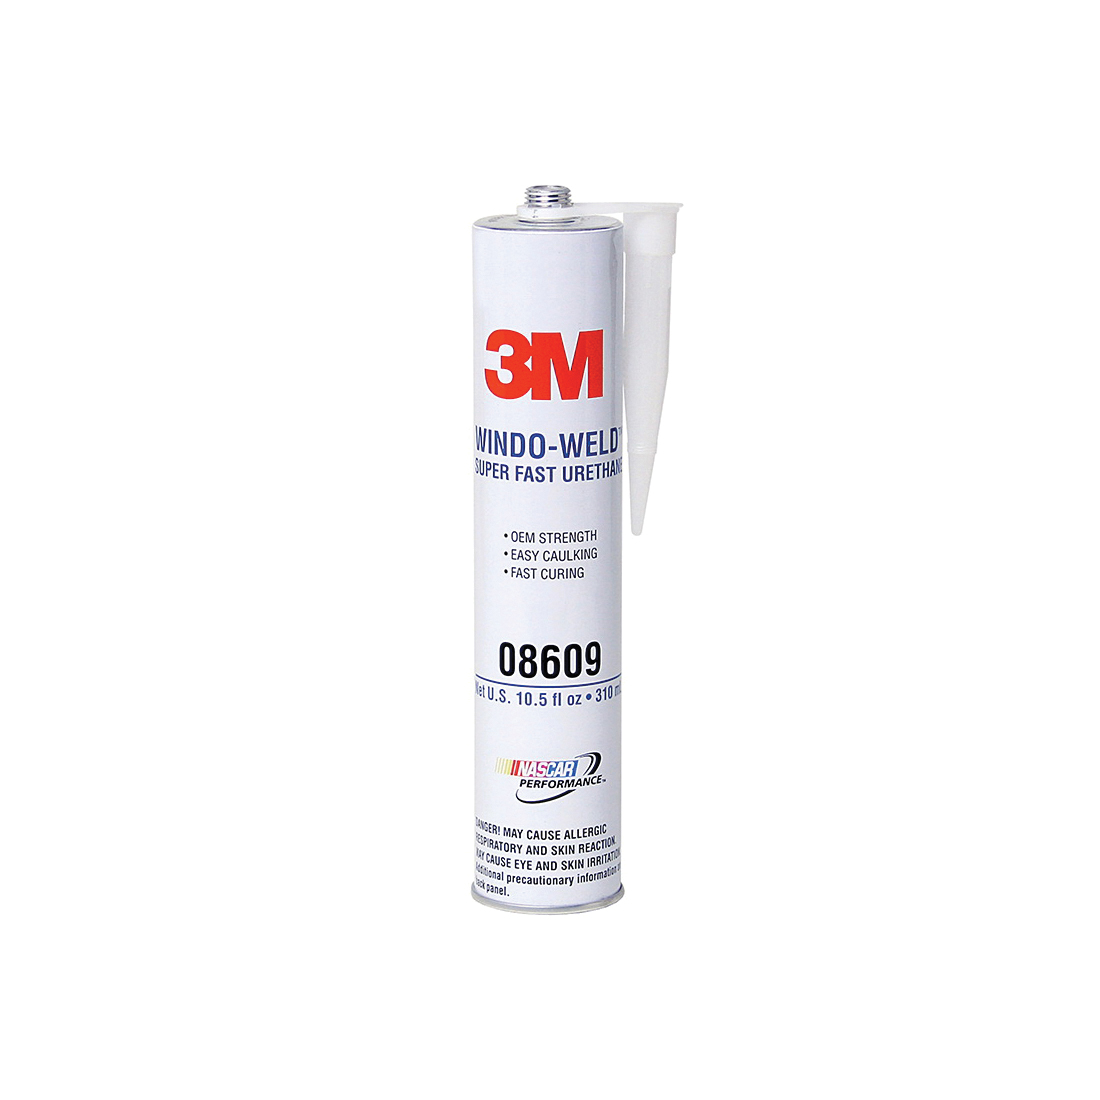 3M™ 051135-08088 Fast Drying General Trim Adhesive, 18.1 oz Aerosol Can, Clear, 1 to 3 min Curing